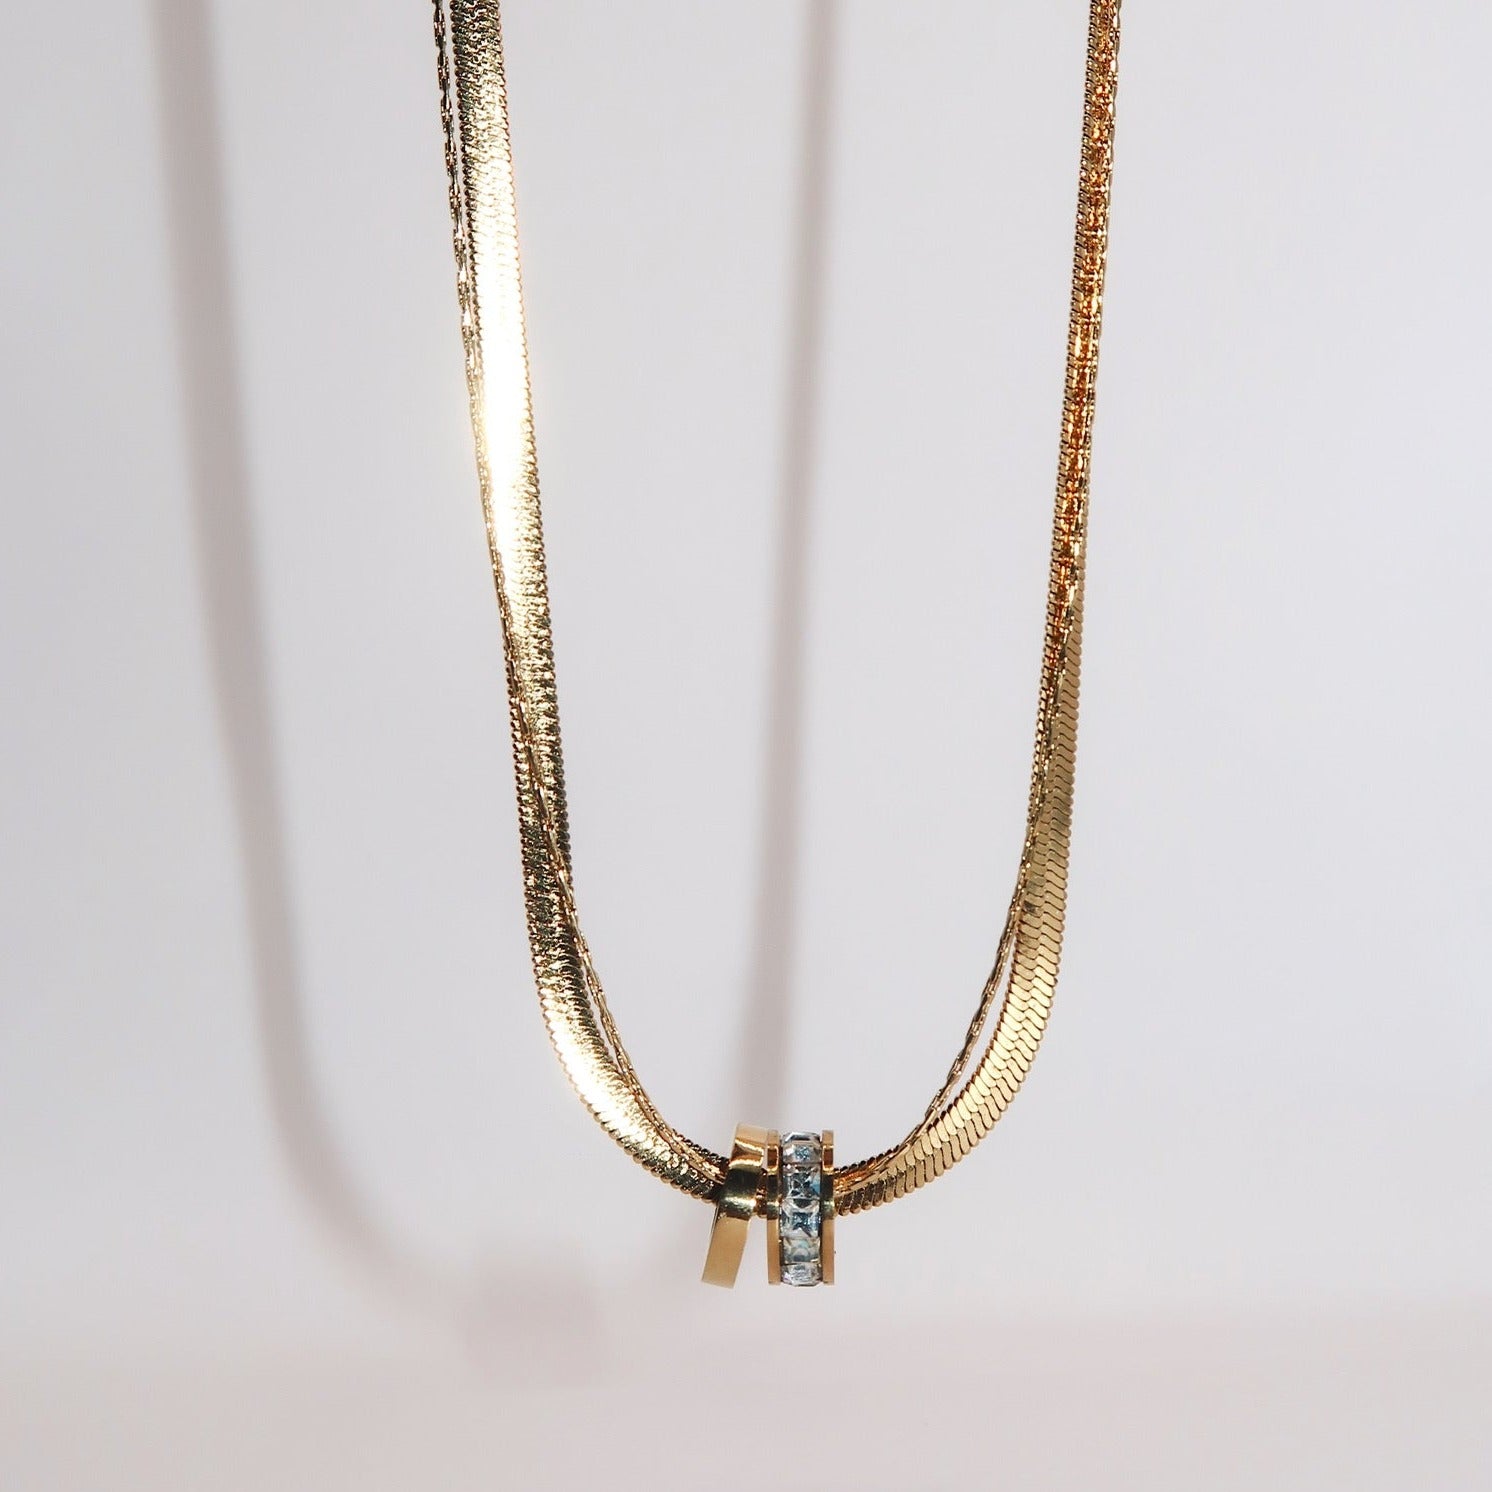 HAILEY - 18K PVD Gold Plated Double Layered Necklace - Mixed Metals